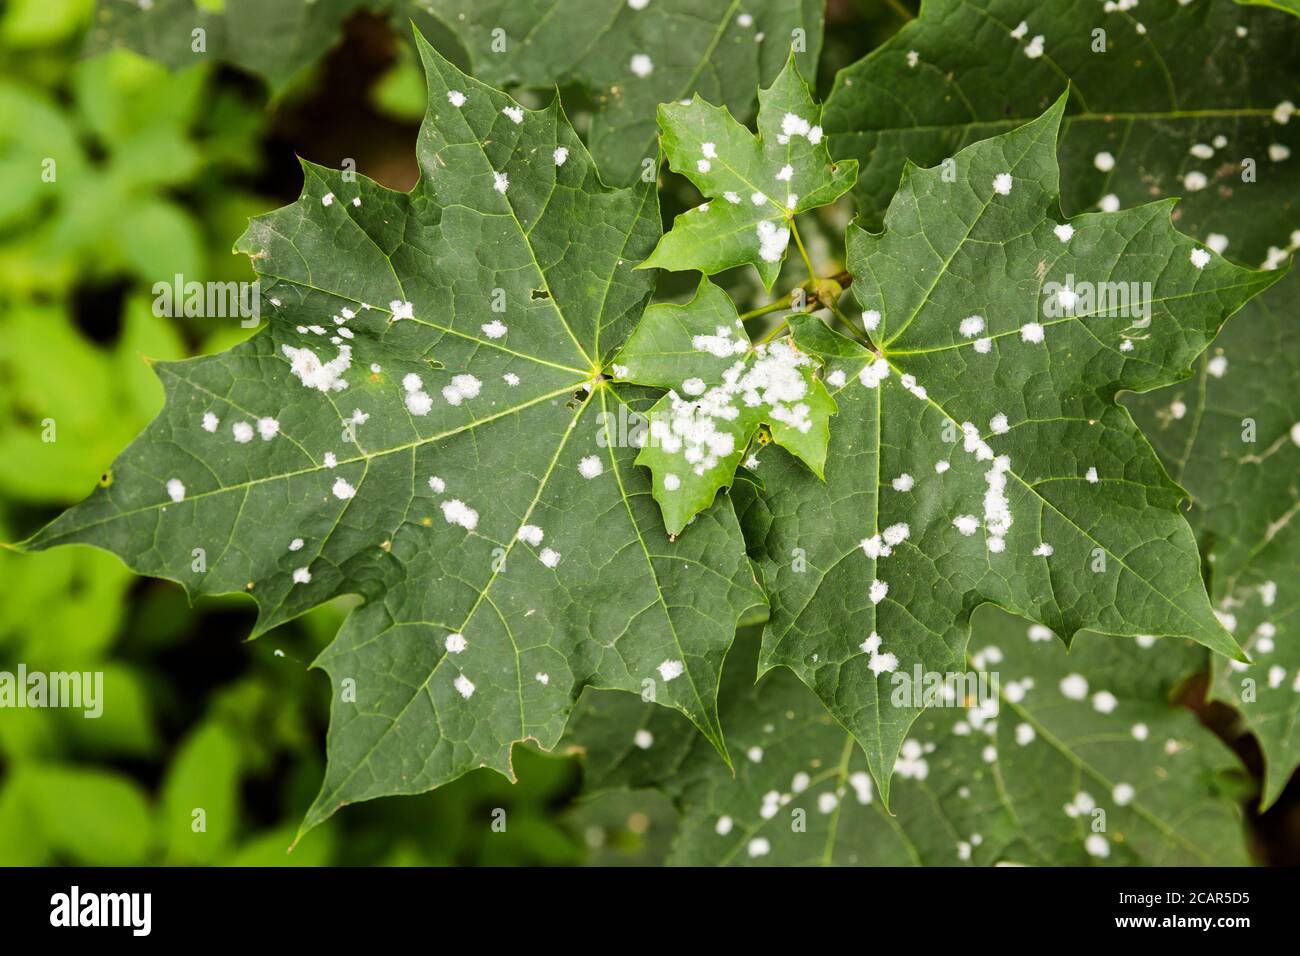 Powdery mildew on maple leaf. White spots of powdery mildew on maple tree. Pathogenic fungi, phytopathology, plant diseases concept Stock Photo